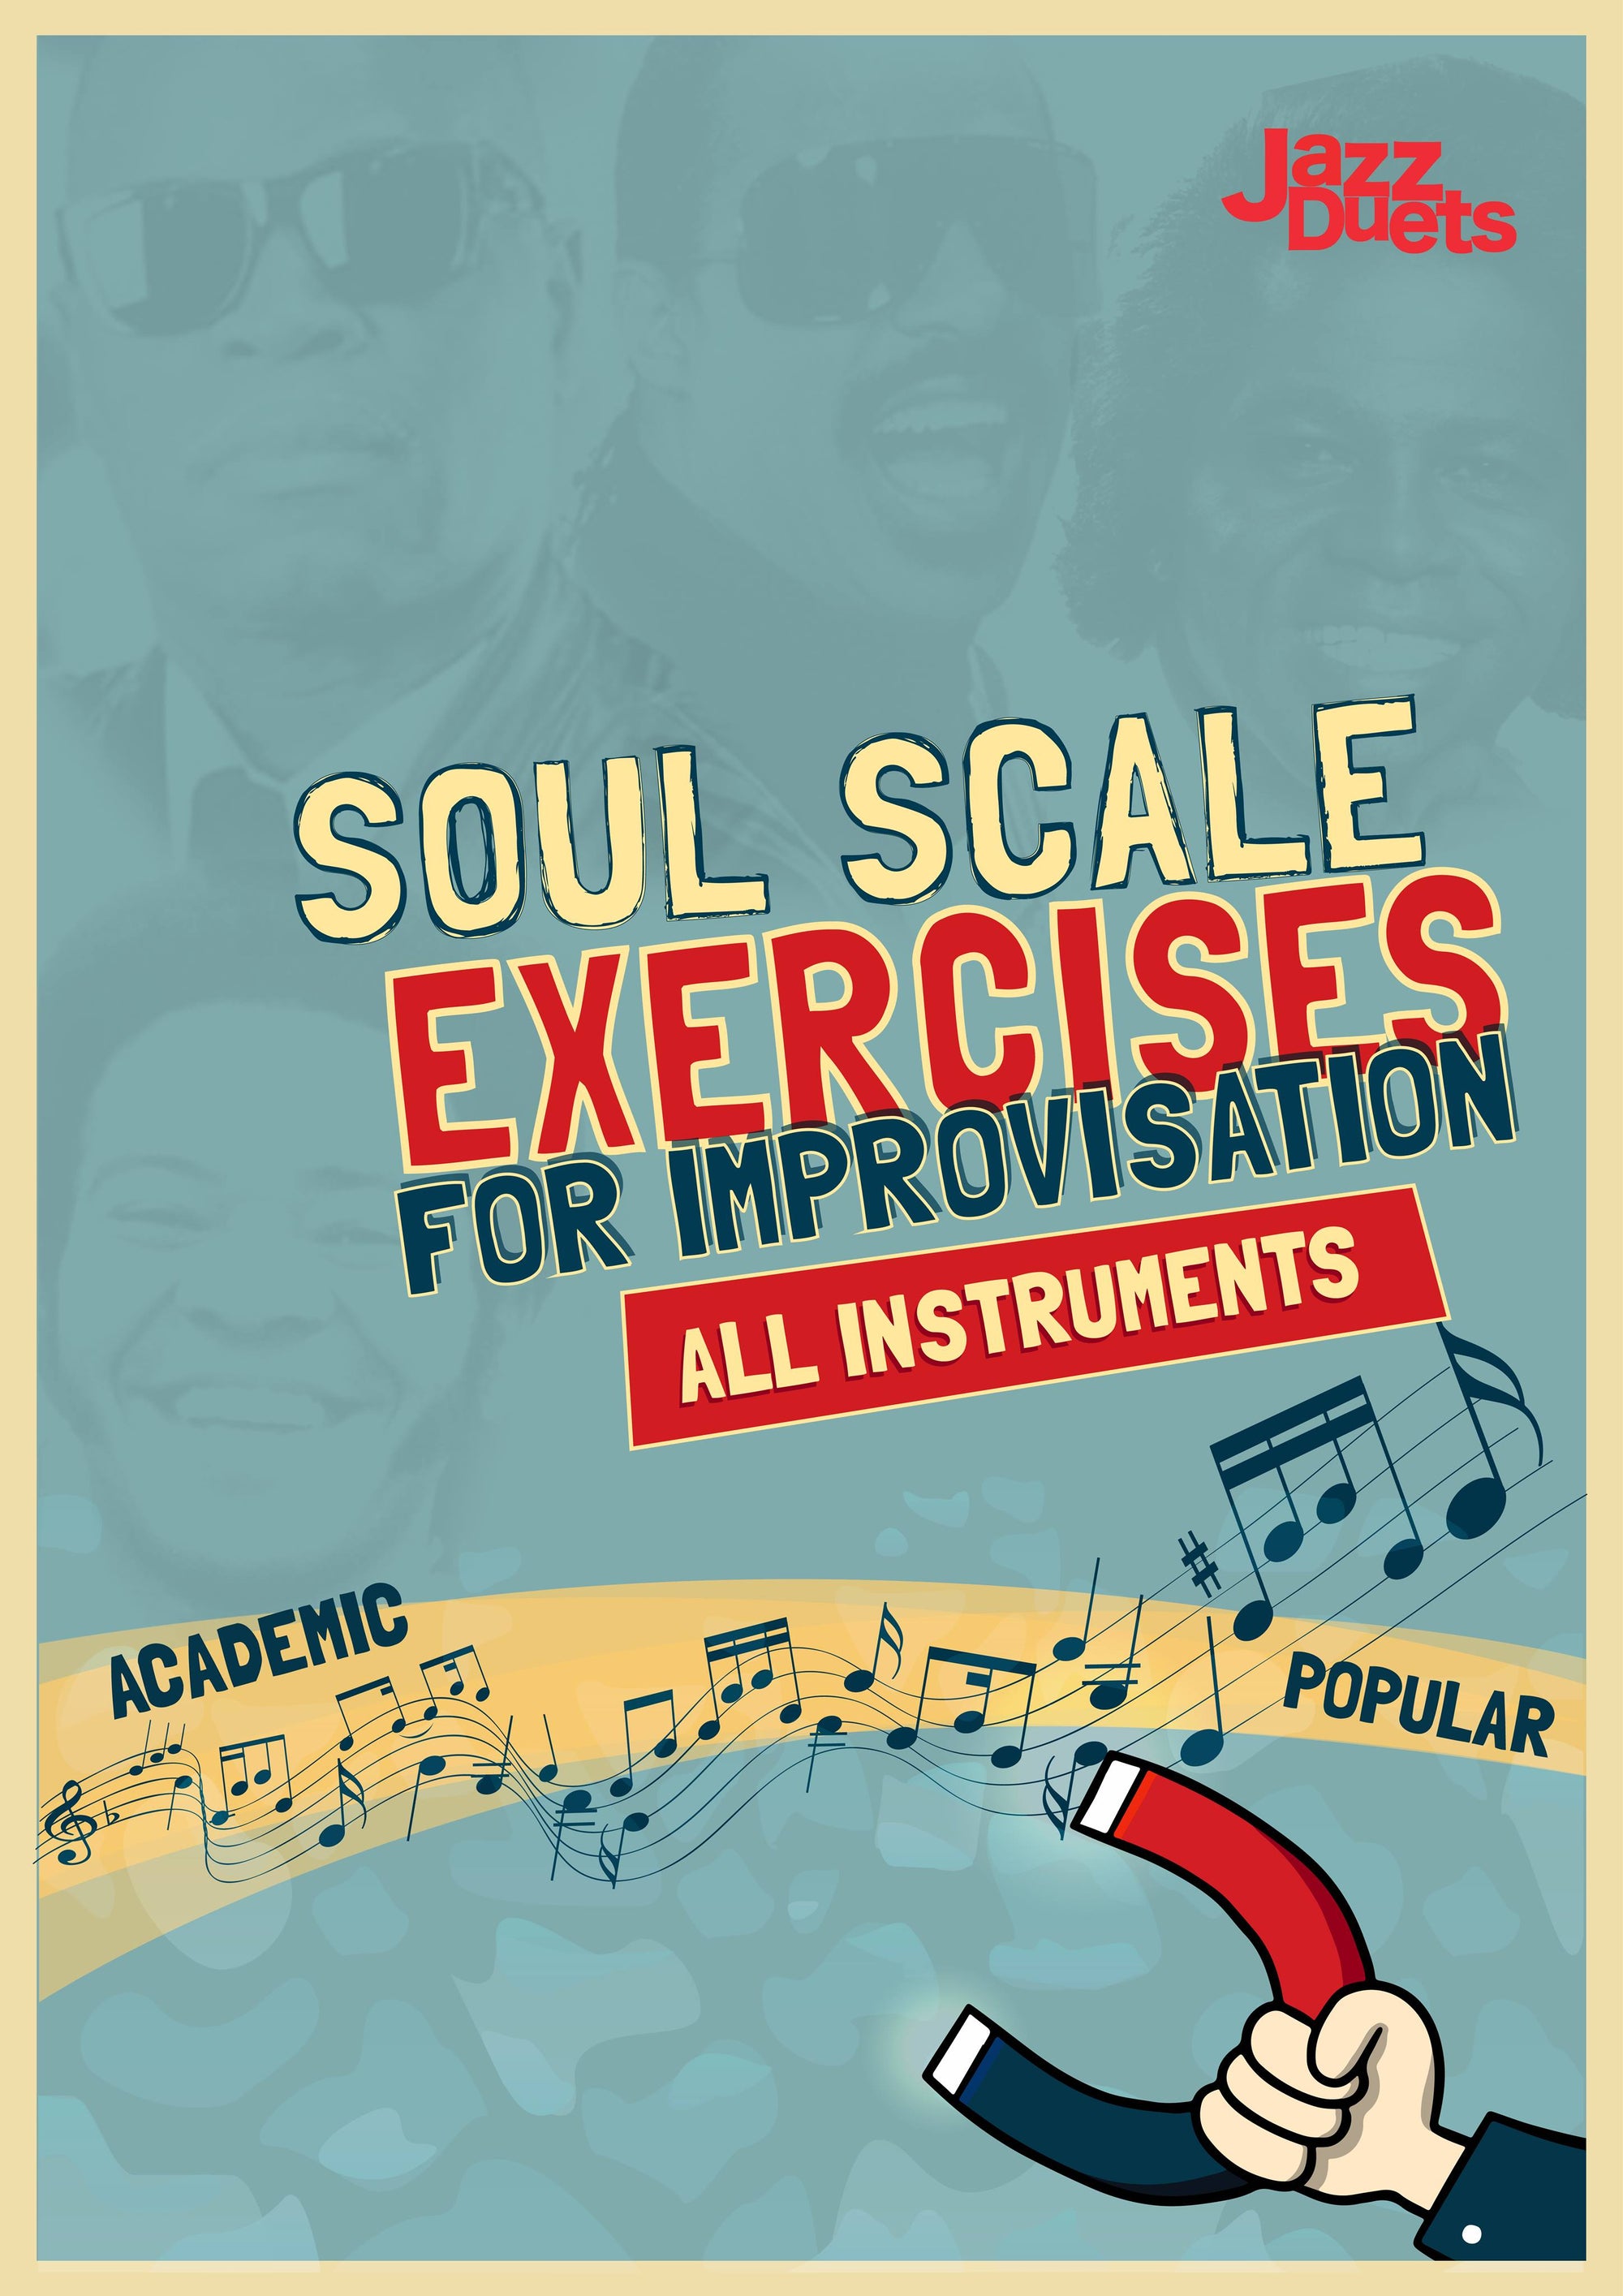 Soul scale exercises for Improvisation -All Instruments